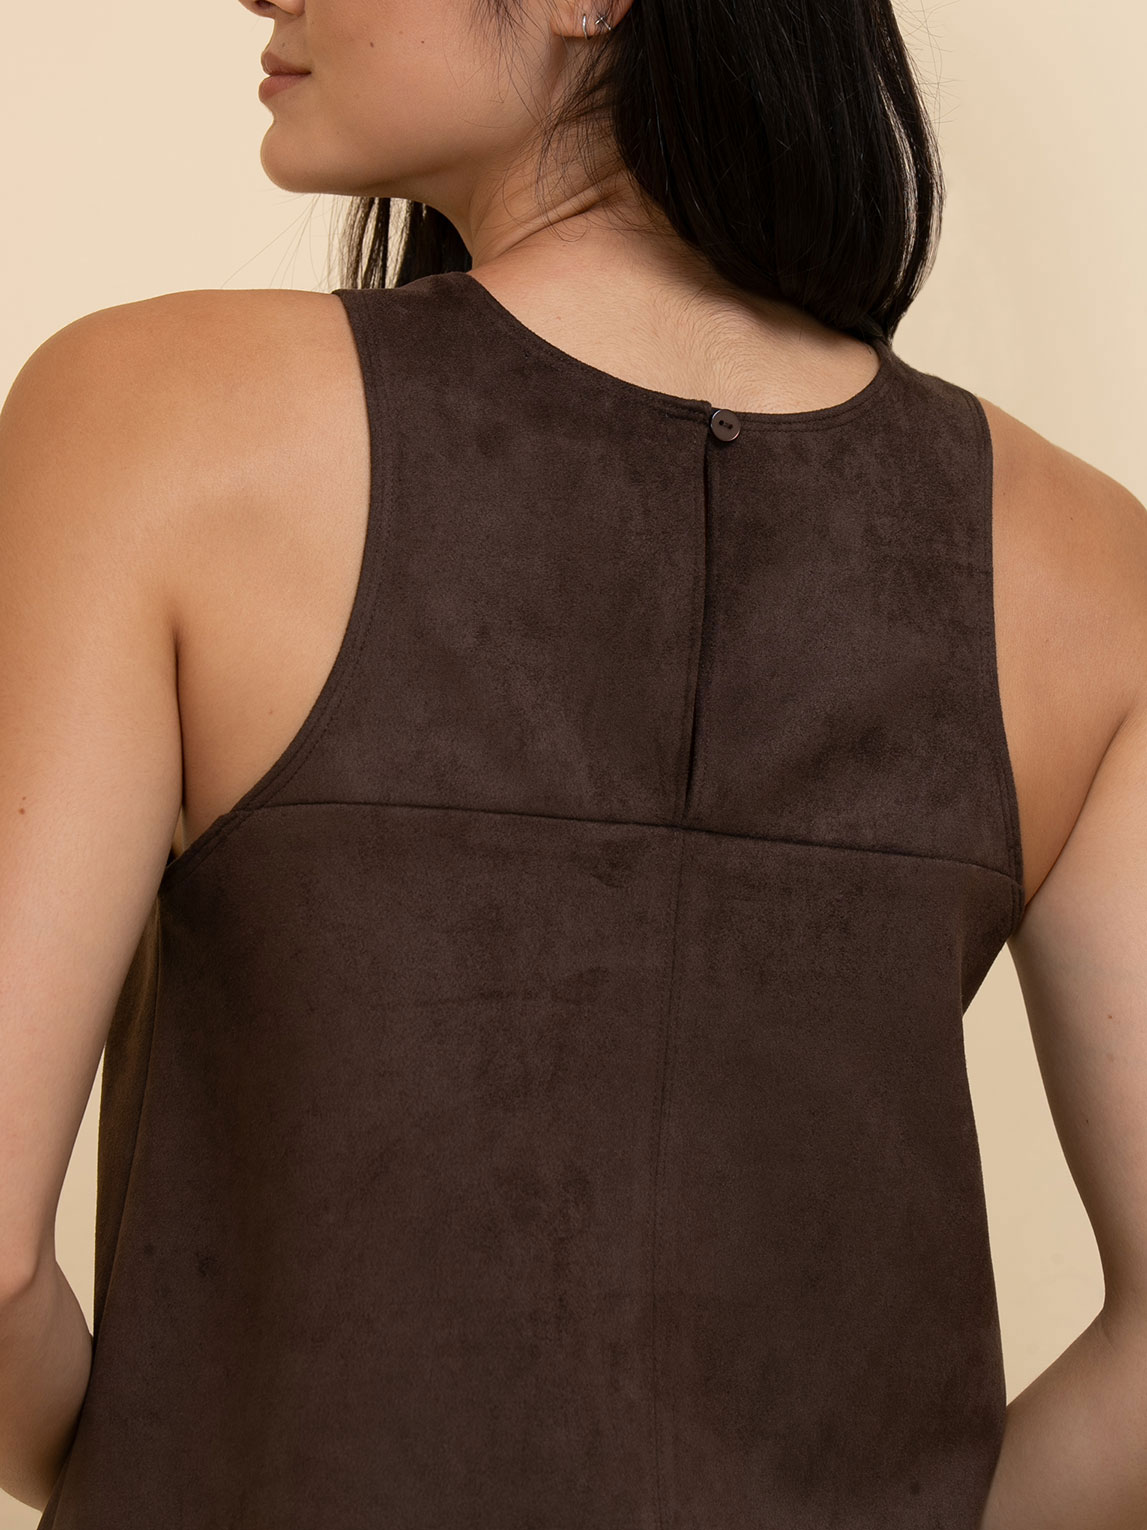 Stylish Tan Suedette Cami Top